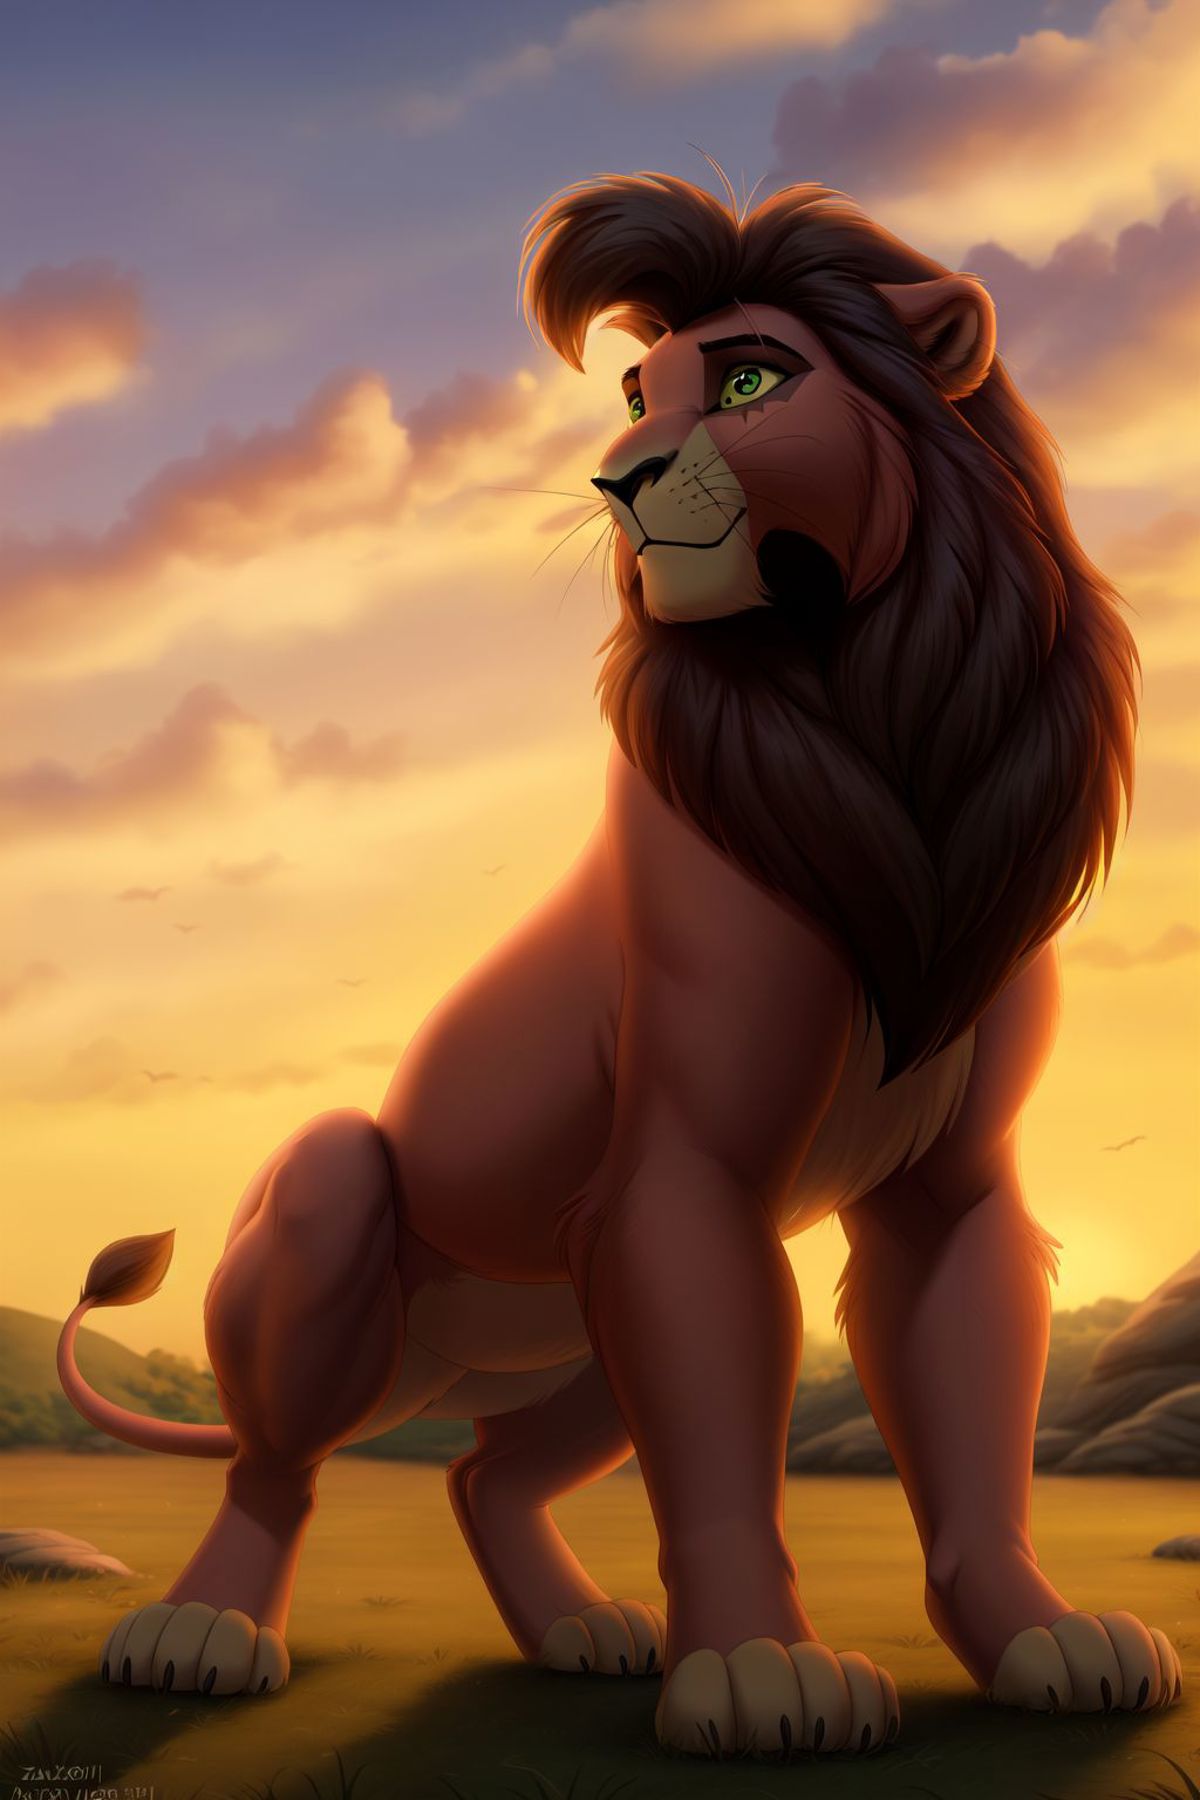 Kovu - The Lion King image by Orion_12